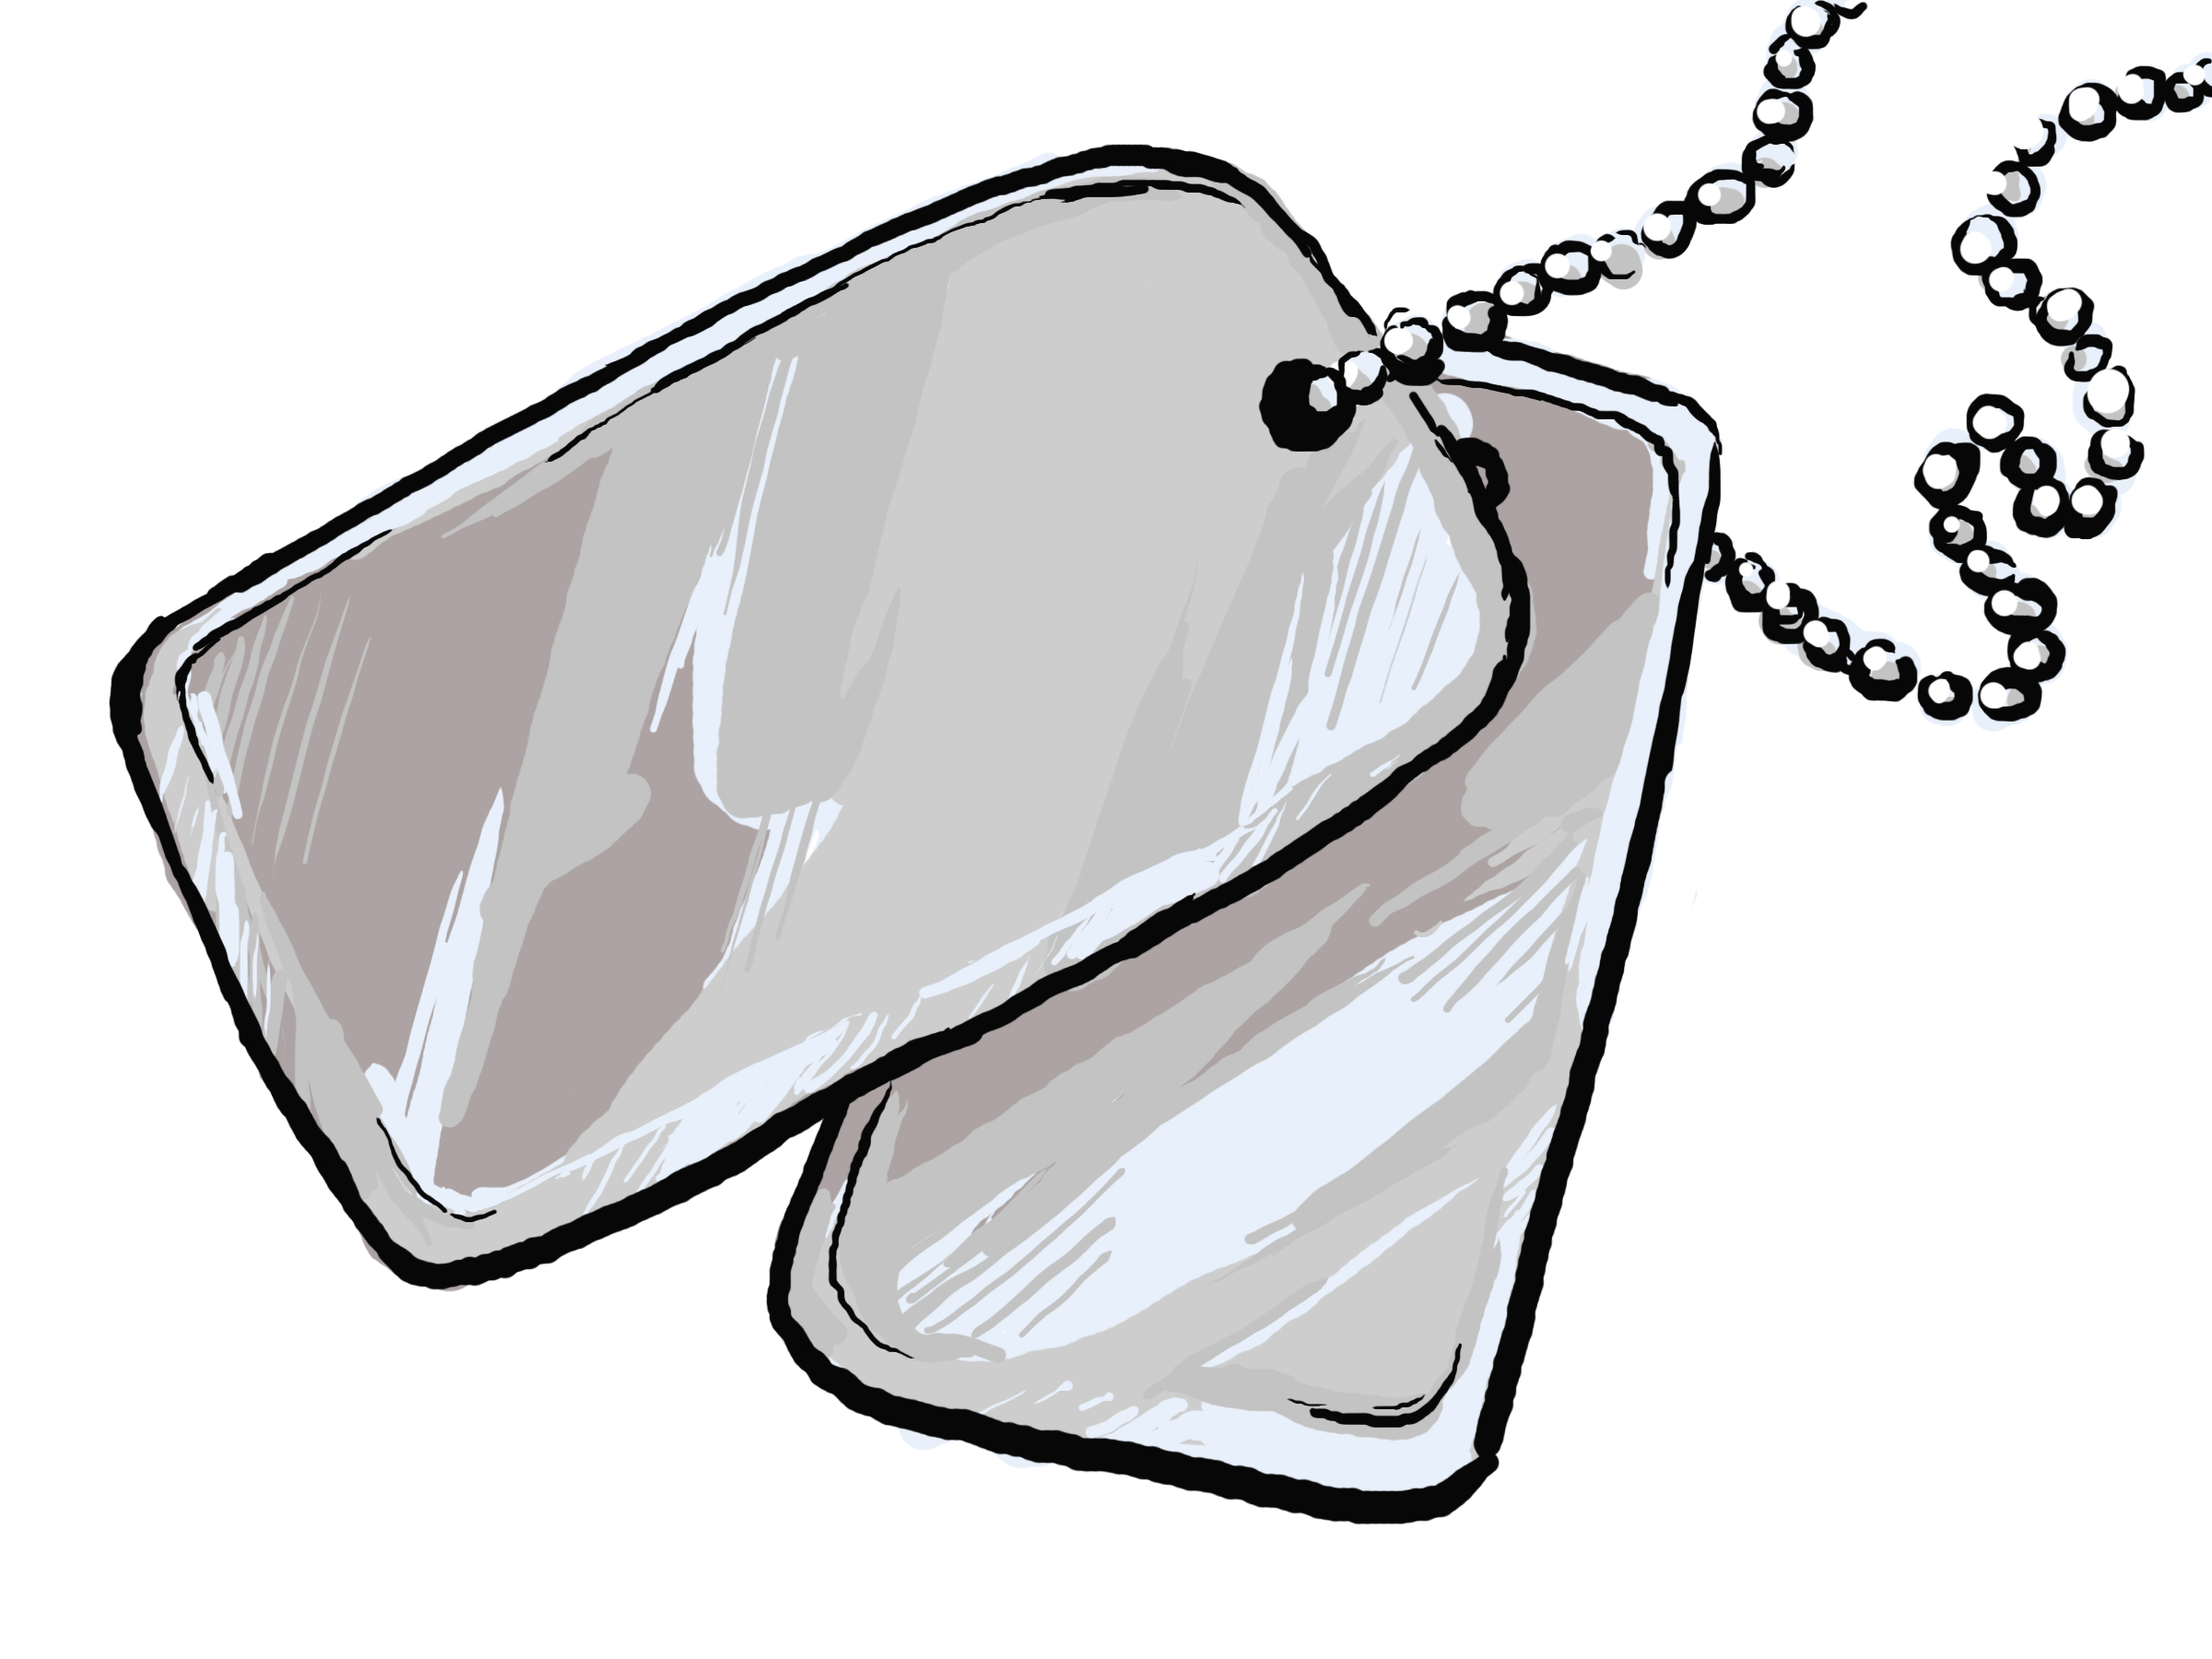 ... Dog Tag - A military styl